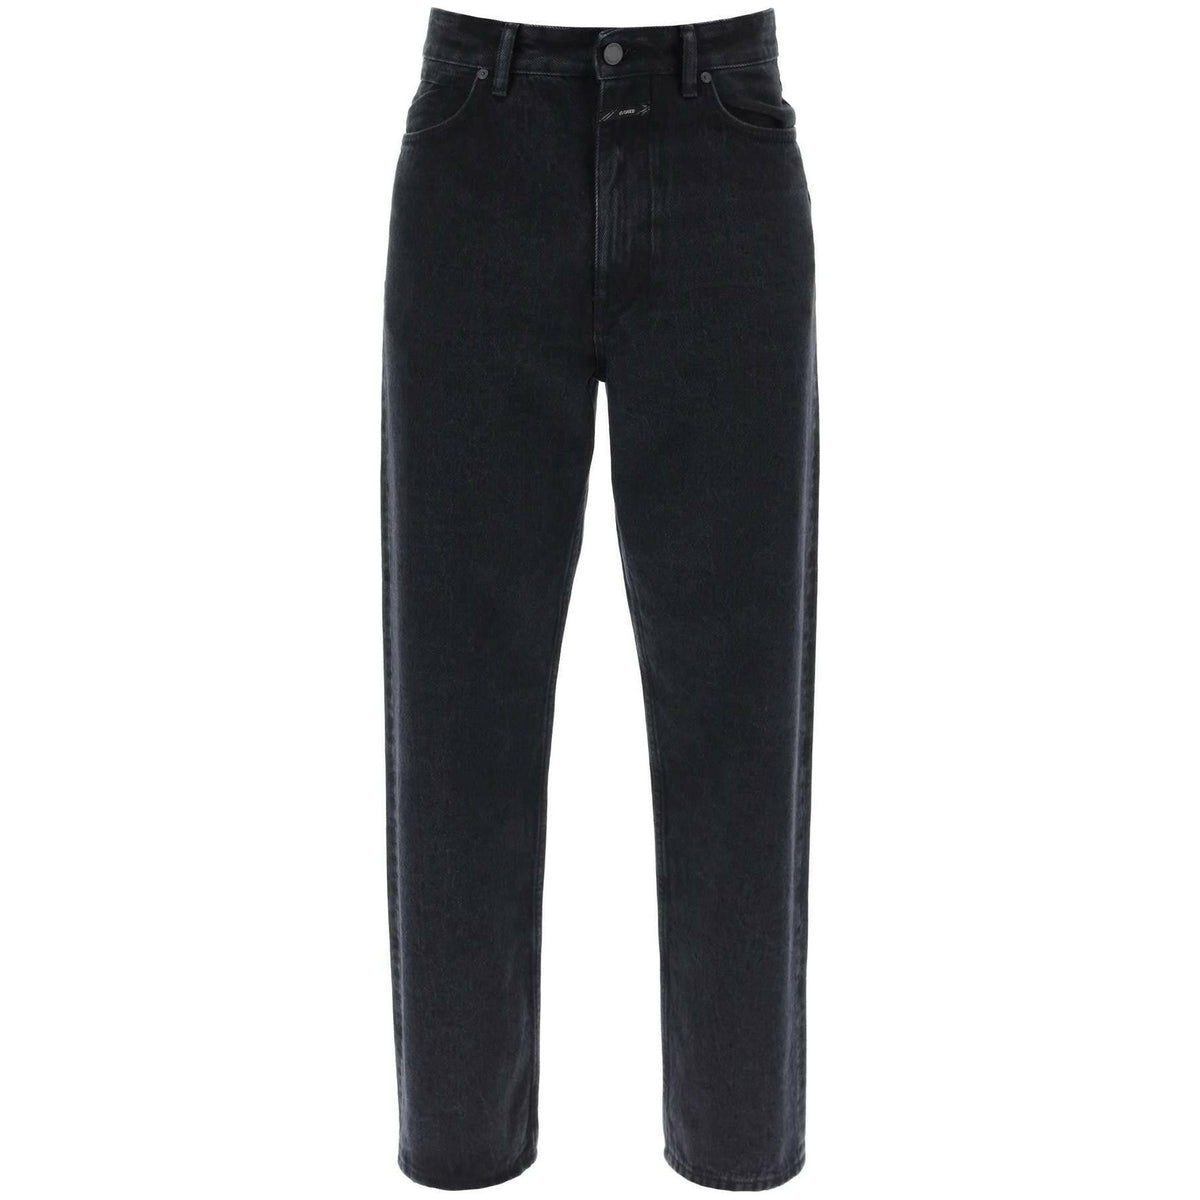 Black Cooper True Regular-Fit Organic and Recycled Blend Cotton Jeans CLOSED JOHN JULIA.